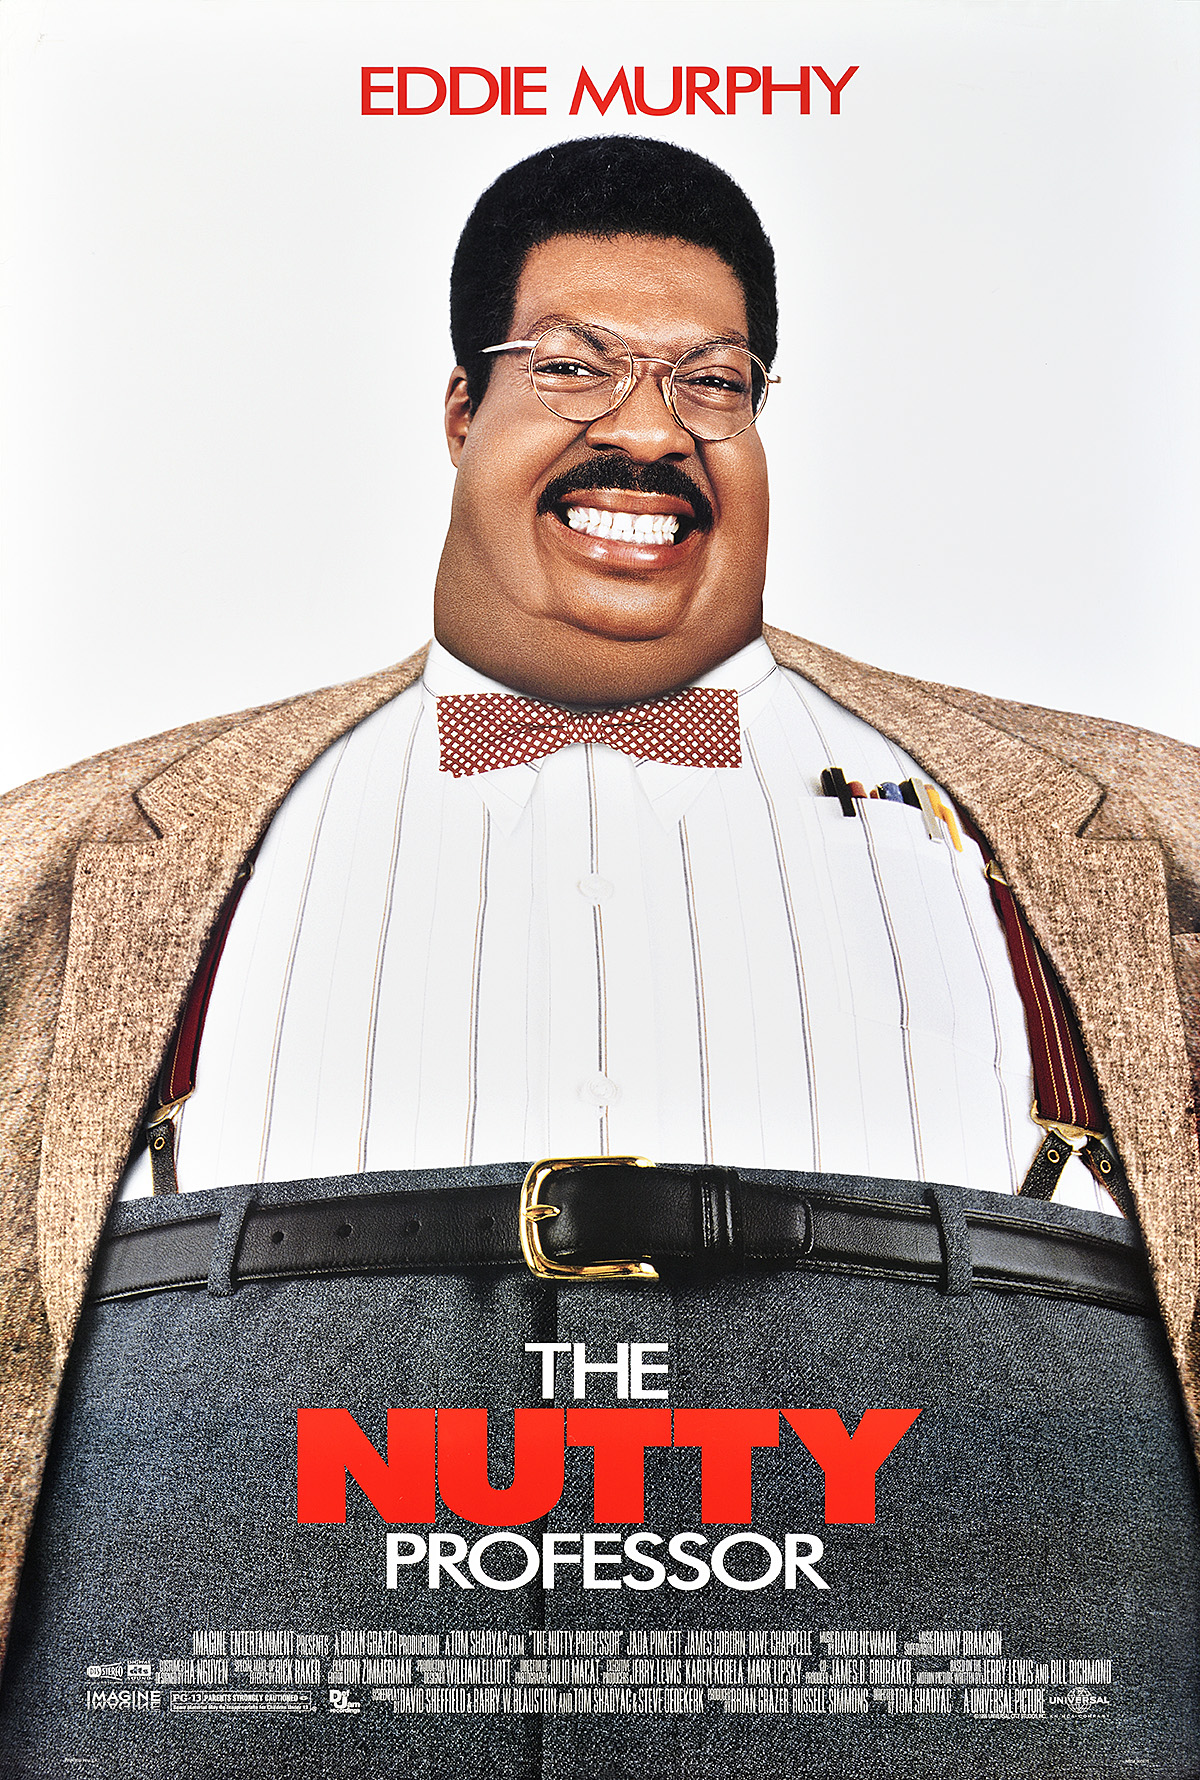 A poster of a smiling fat man wearing glasses, a blazer, suspenders, and a bowtie.